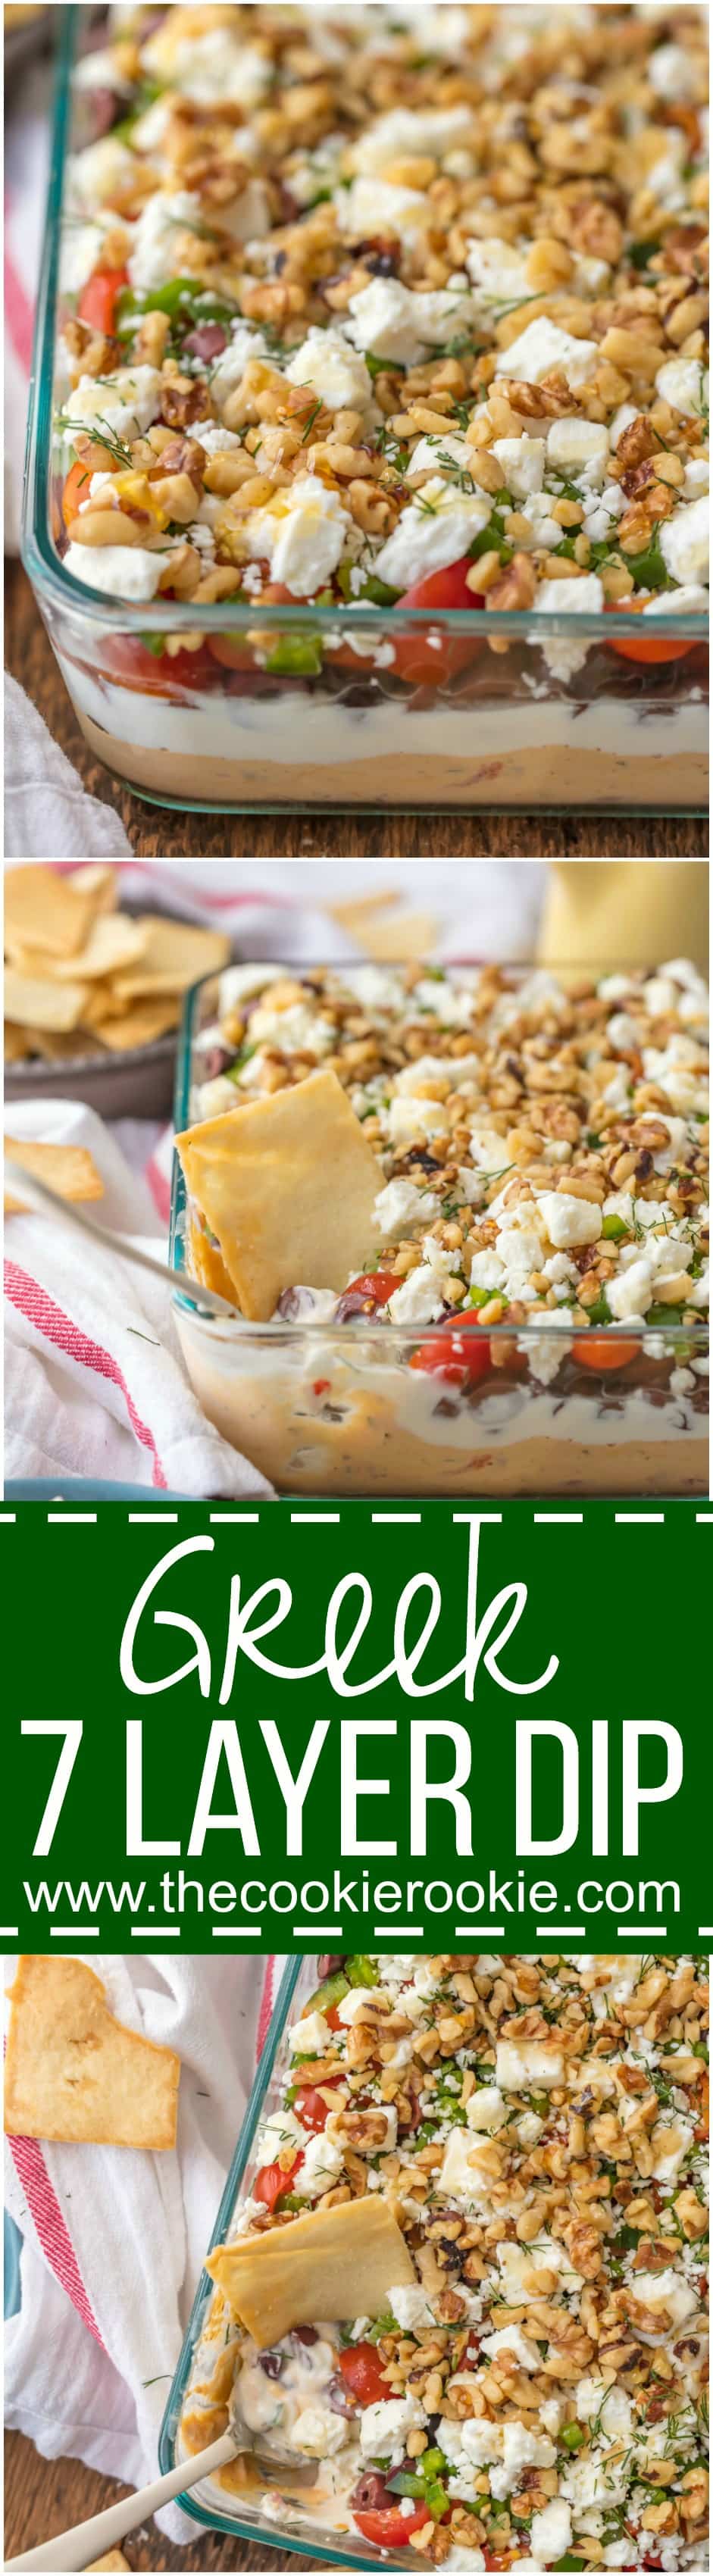 GREEK 7 LAYER DIP is a fun twist on a classic appetizer. This delicious dip is the perfect sharable app for Christmas, NYE, or any reason for tailgating. Layers of hummus, greek yogurt, feta, and so much more make it SO addicting!